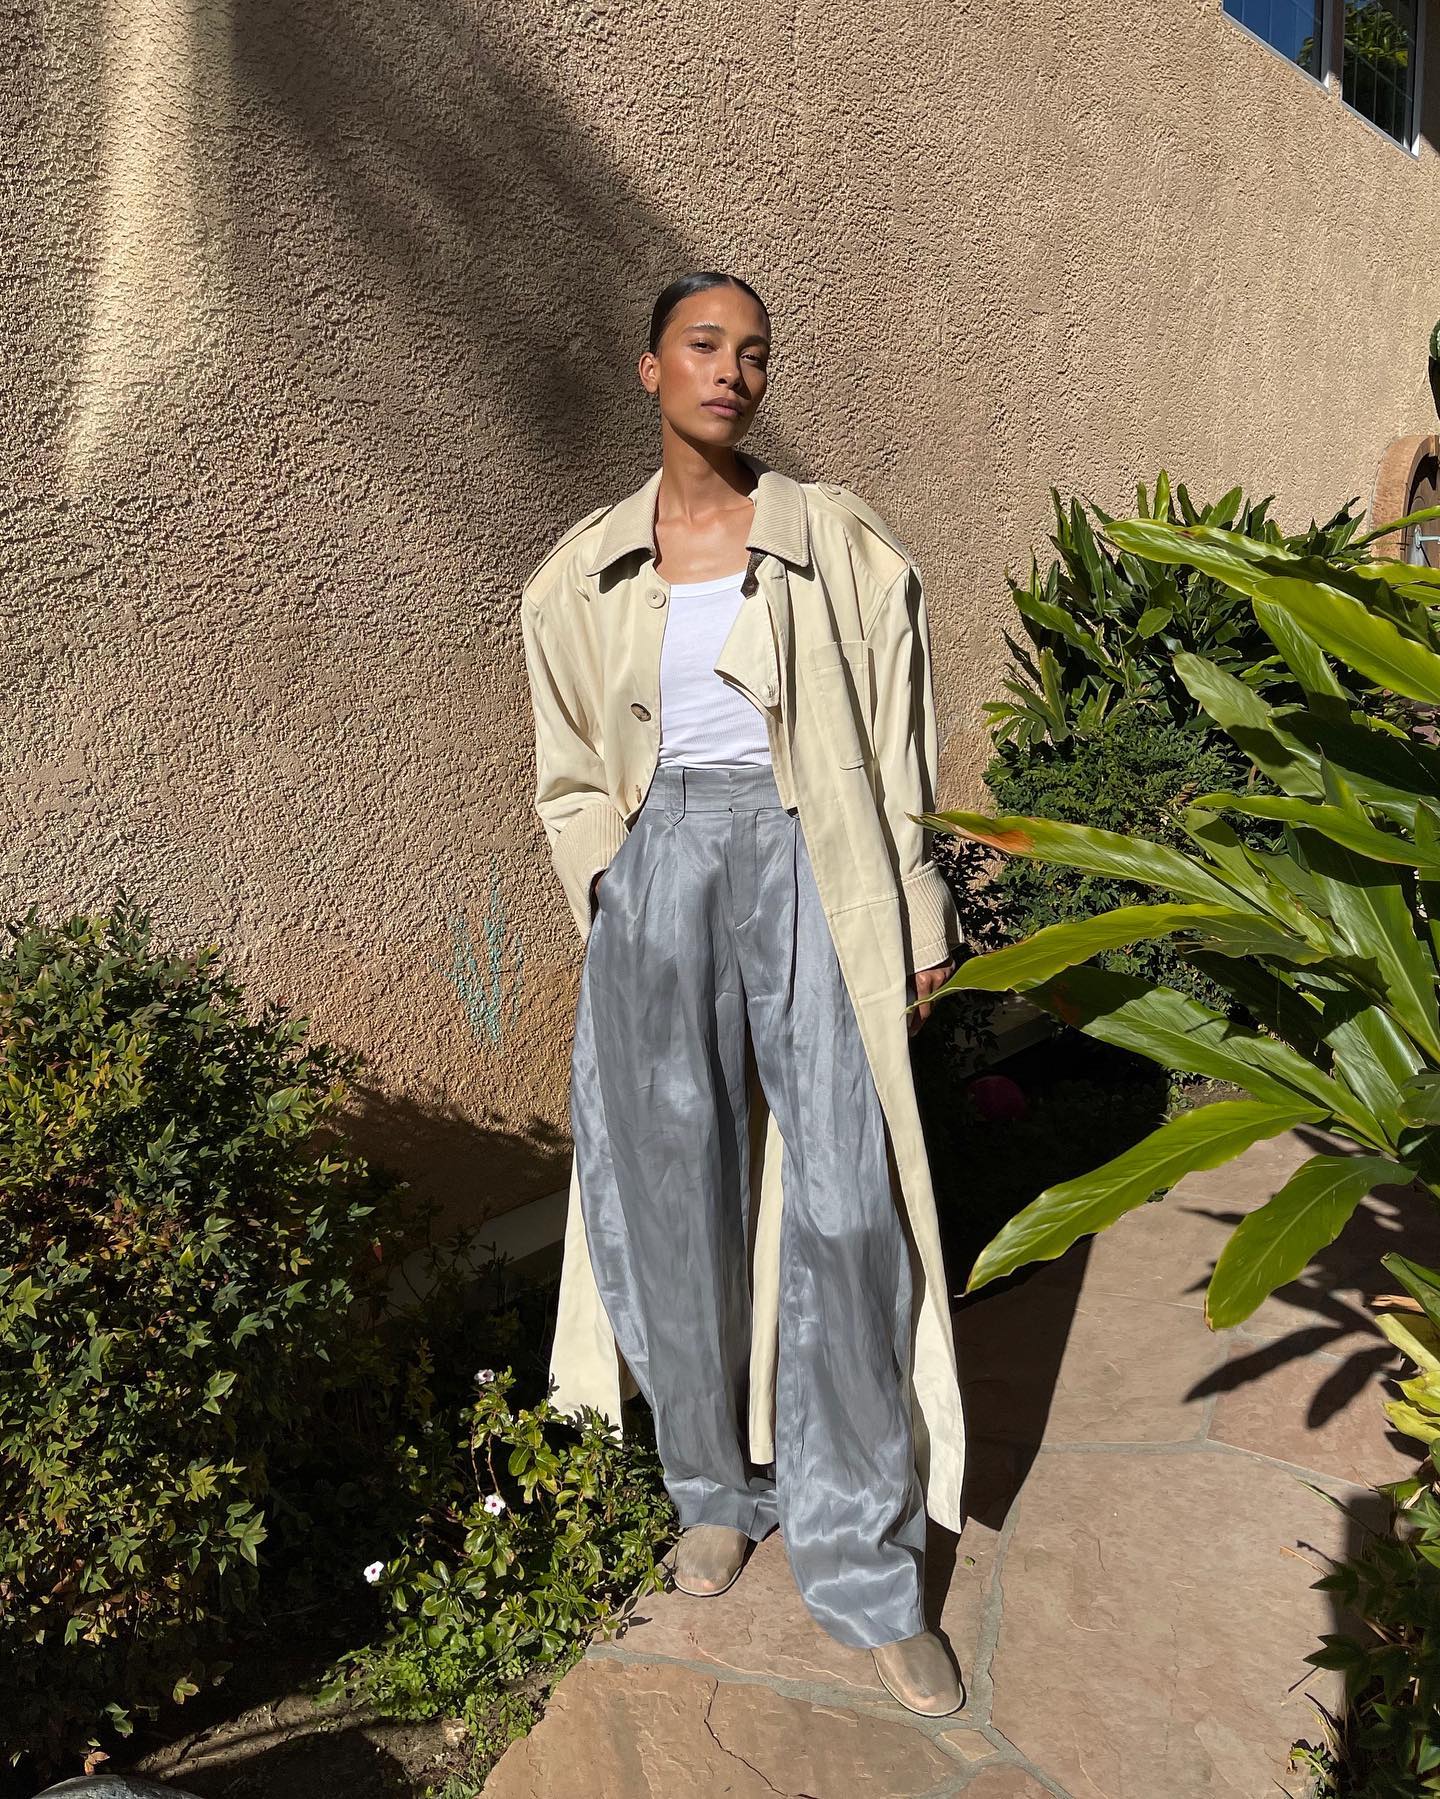 TyLynn Nguyen 31 Affordable Quiet Luxury Finds for Expensive-Looking Outfits Leather Trench Coat White Top Metallic Silver Pants The Row Mesh Shoes